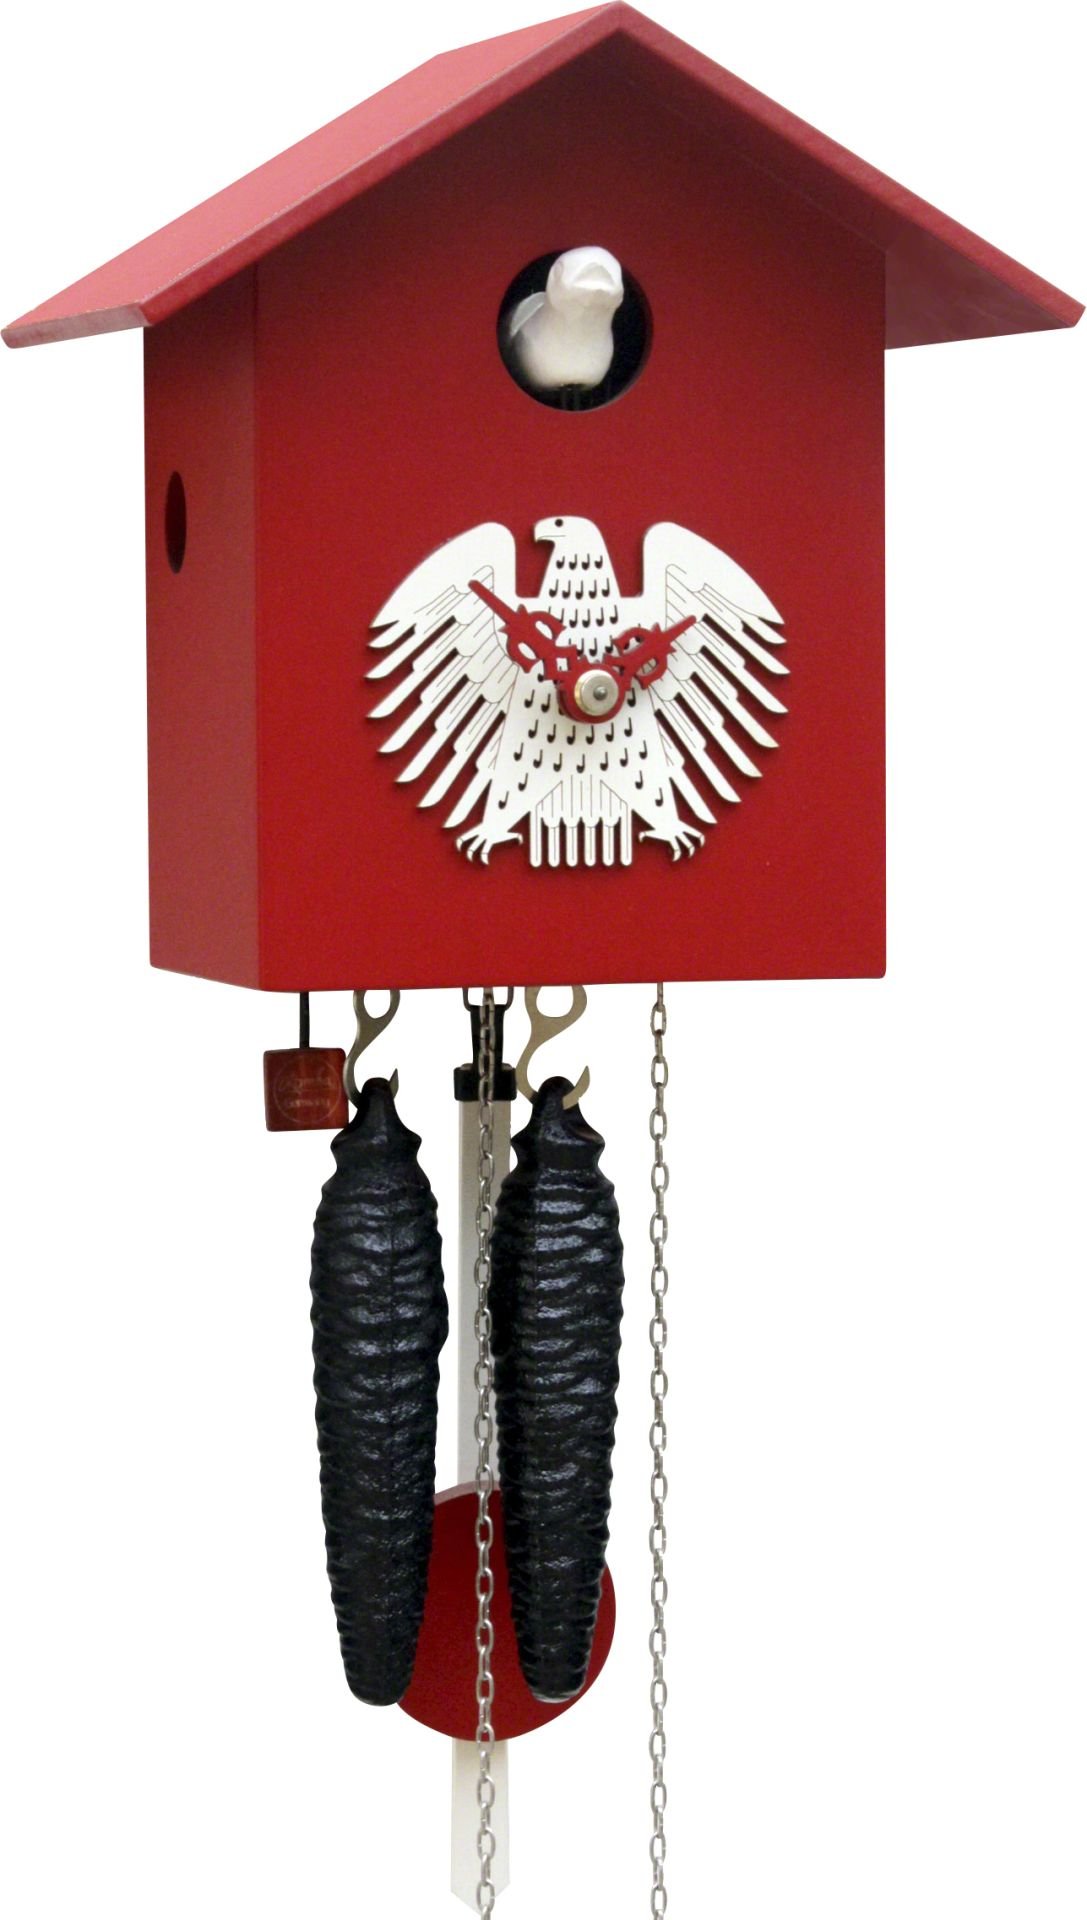 Cuckoo Clock Modern Art Style 1 Day Movement 18cm by Rombach & Haas